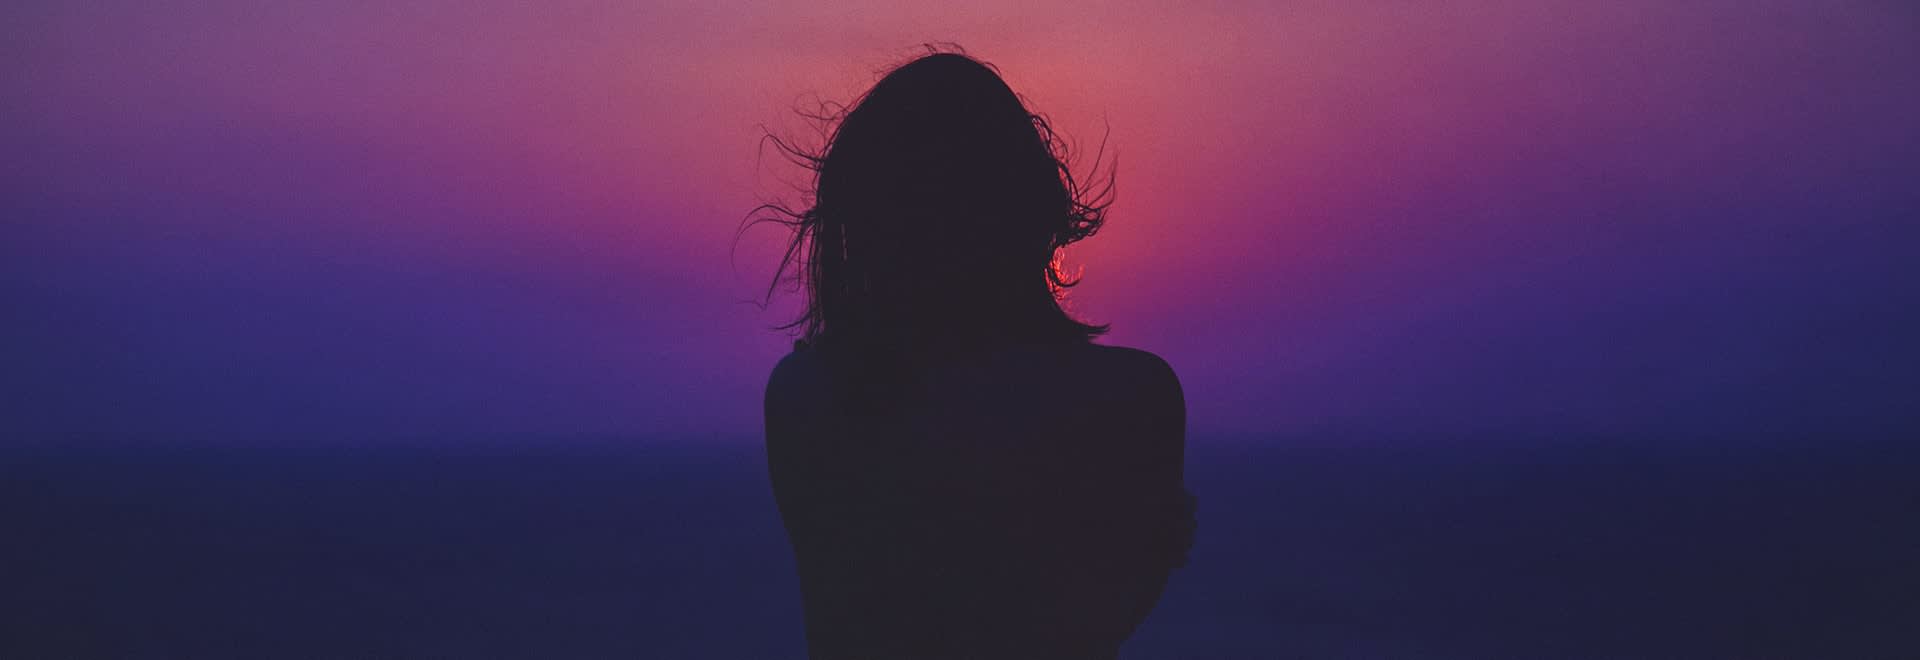 Picture of a woman facing towards colorful sunrise